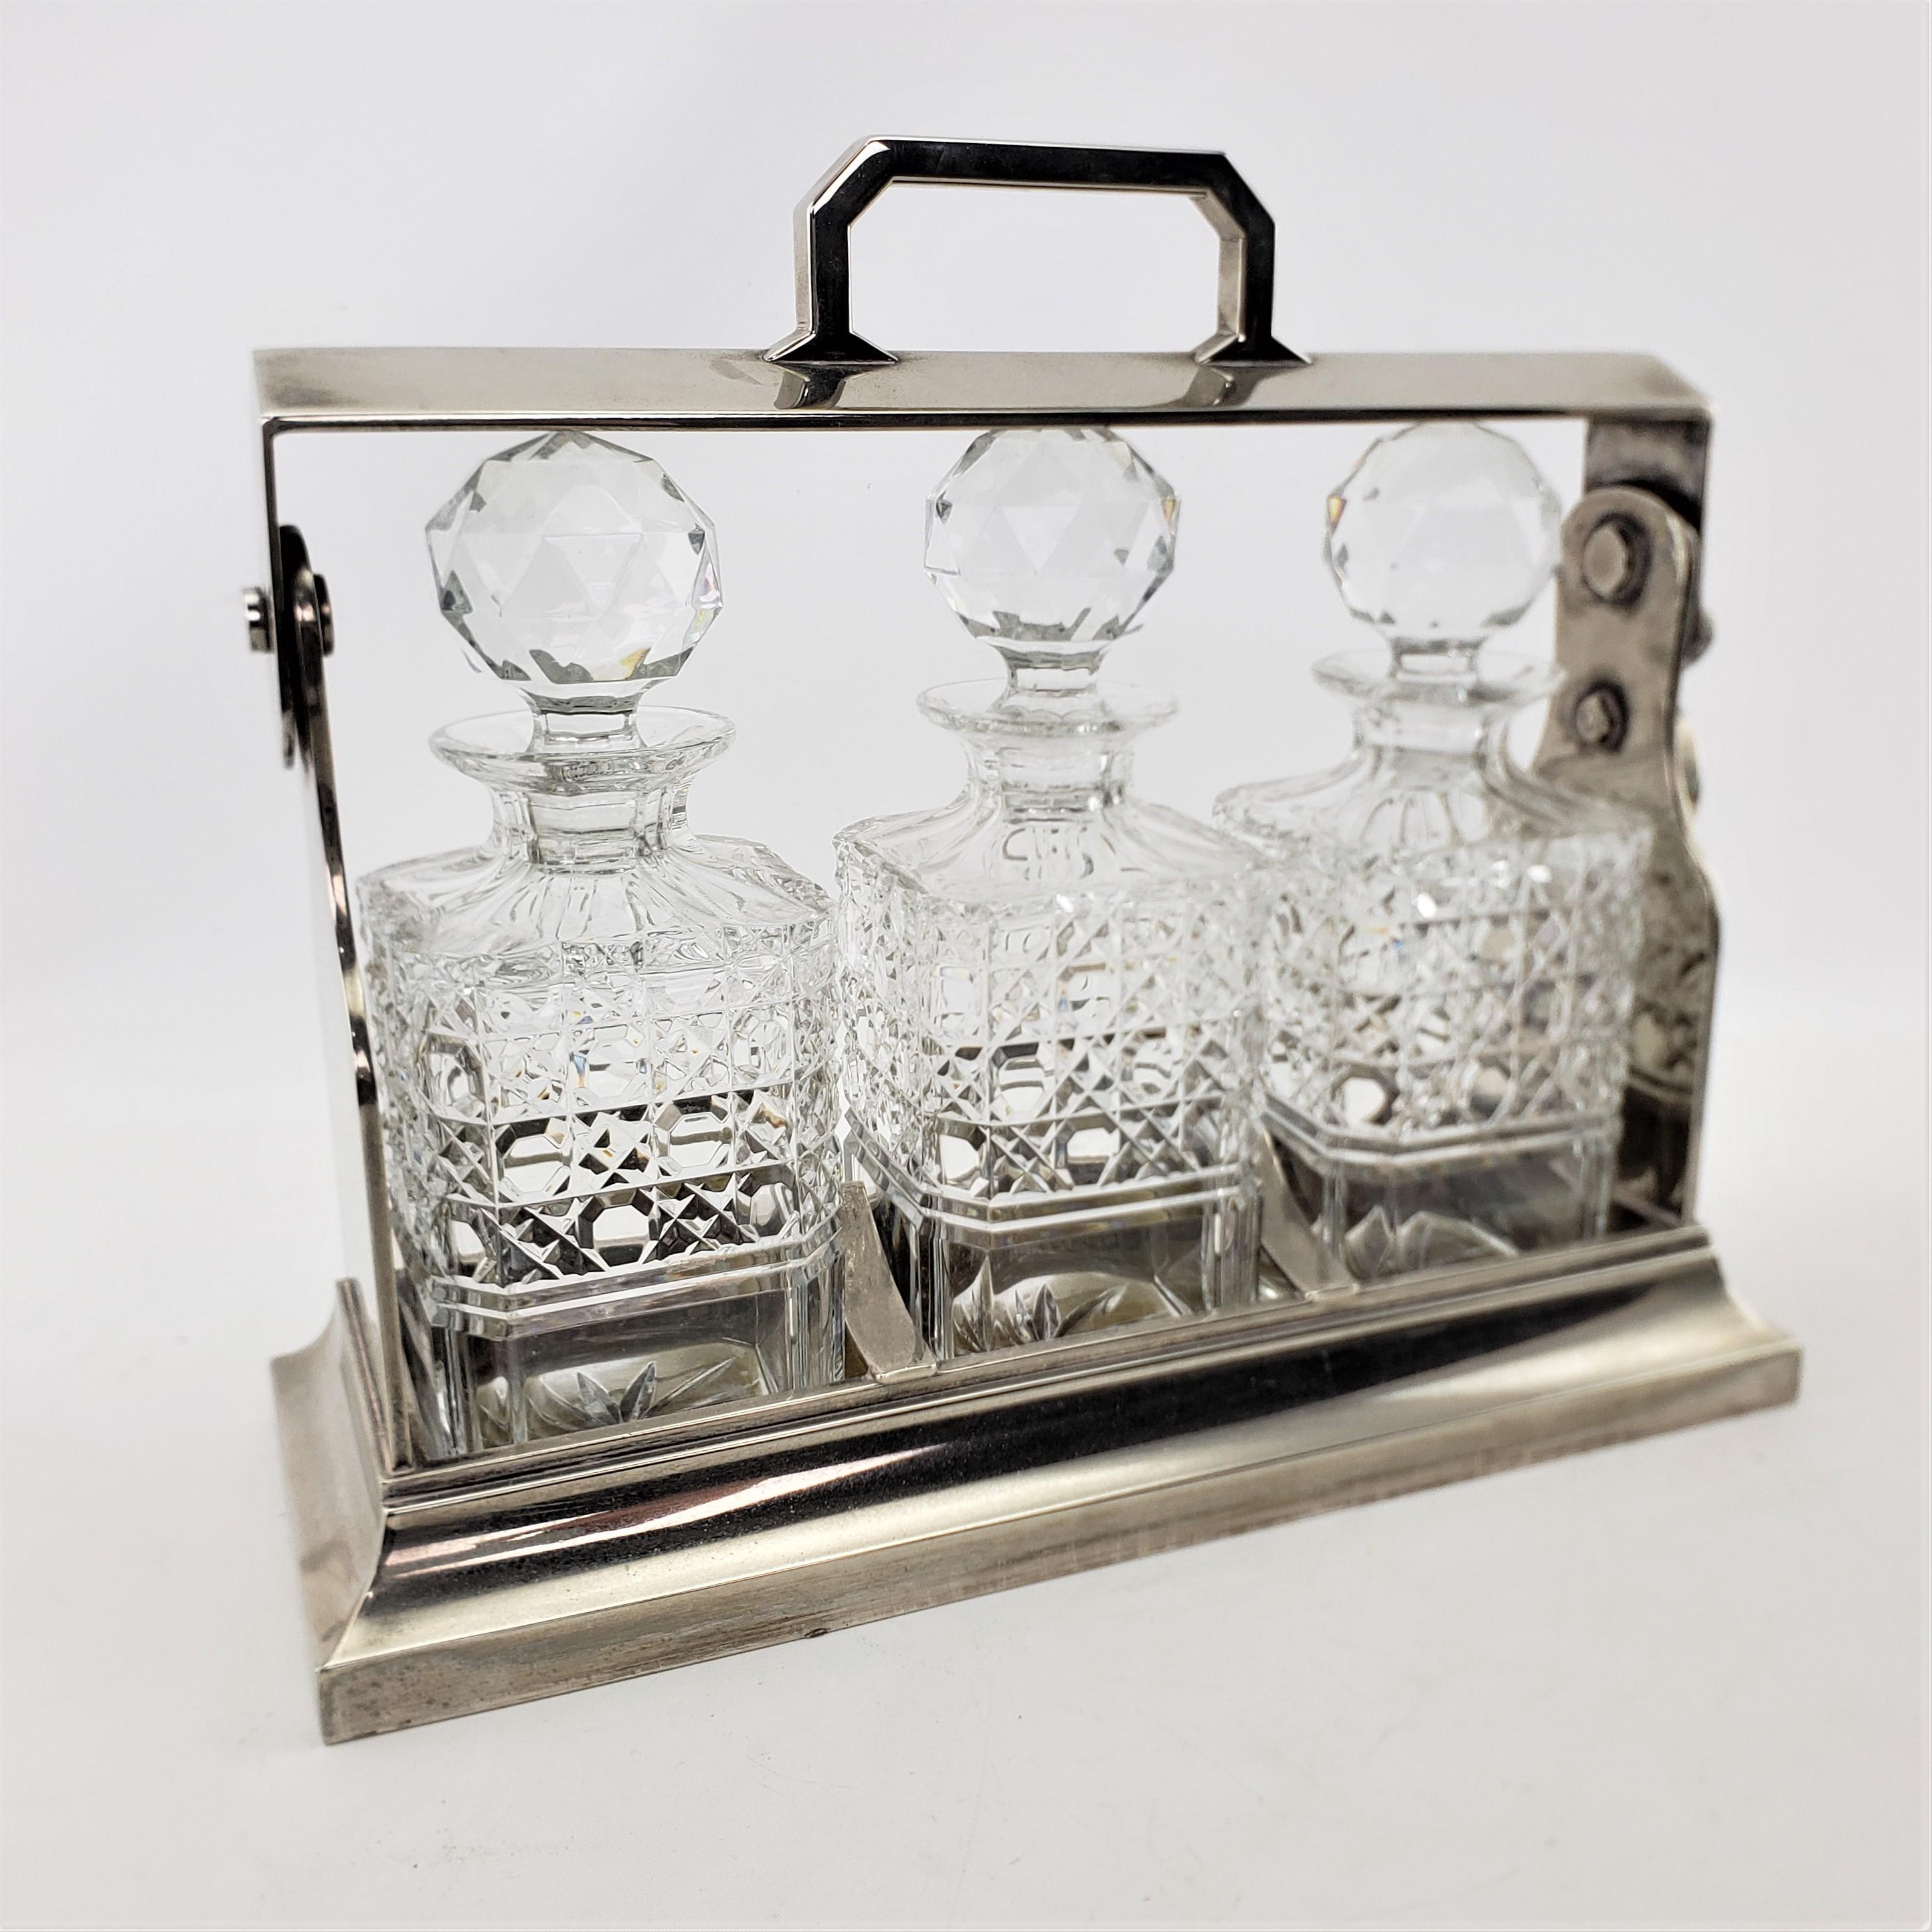 This silver plated three bottle tantalus has no maker's marks, but is presumed to have originated from England and date to approximately 1900 and done in the period Edwardian style. The tantalus is composed of silver plate with a sturdy locking